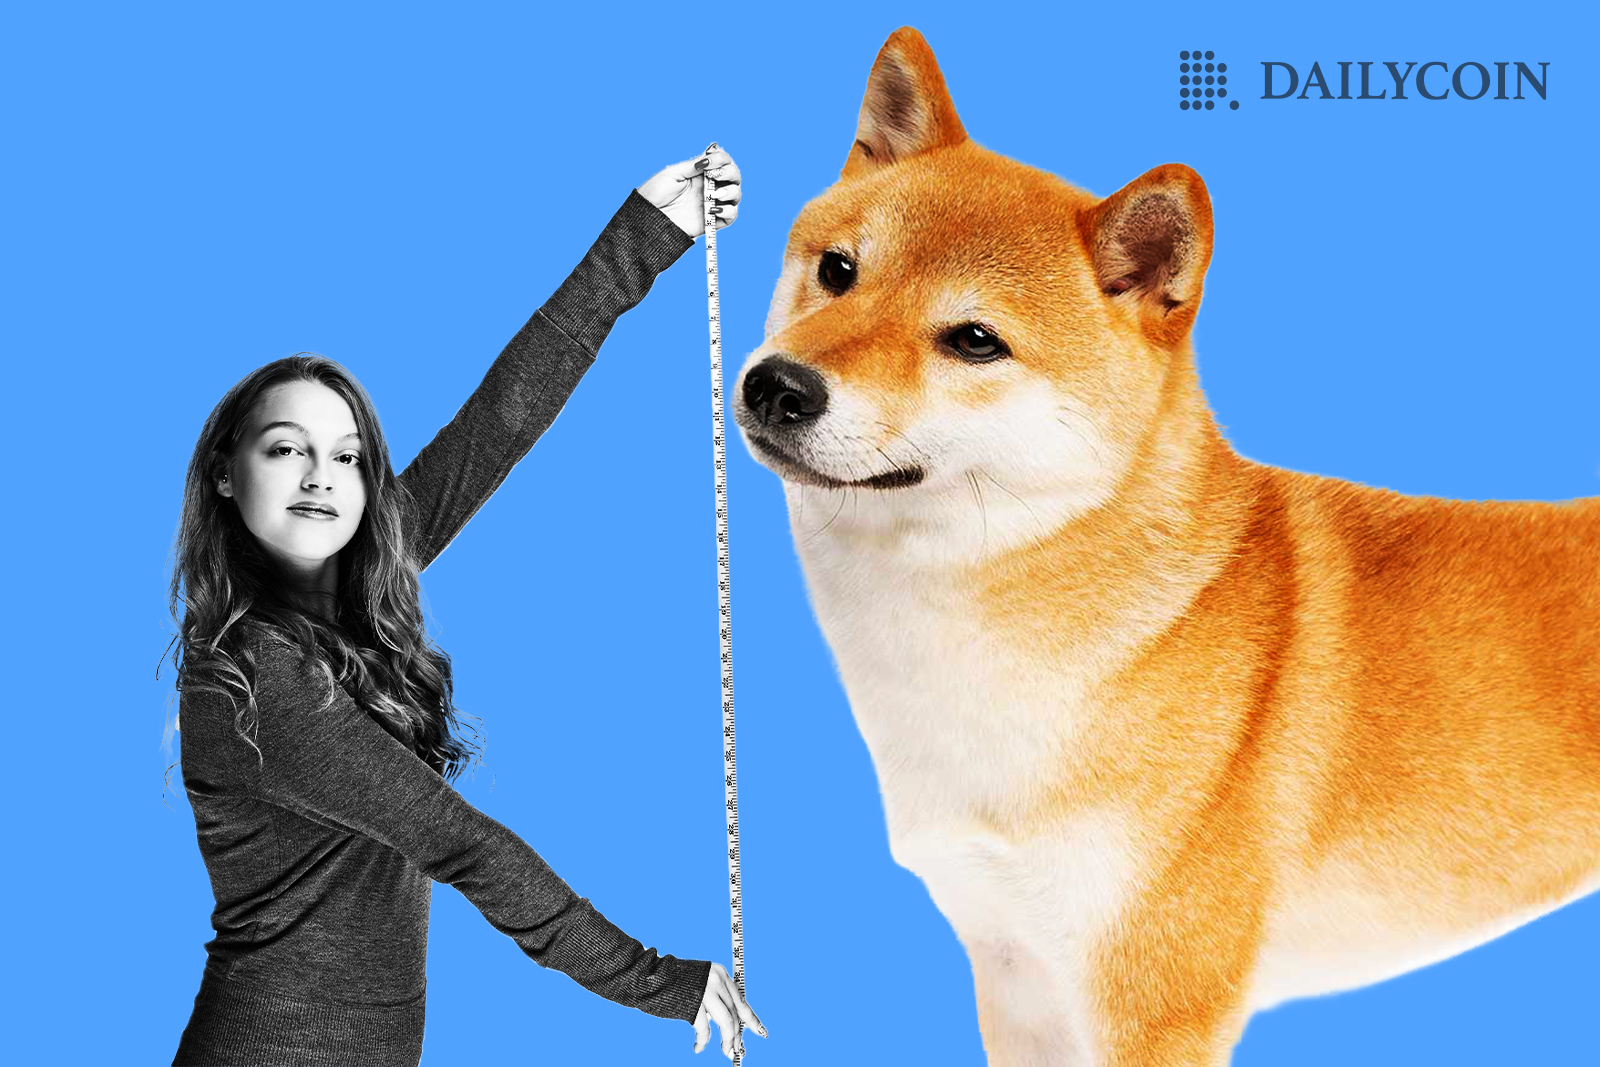 A woman symbolically measures a giant Shiba Inu breed of dog